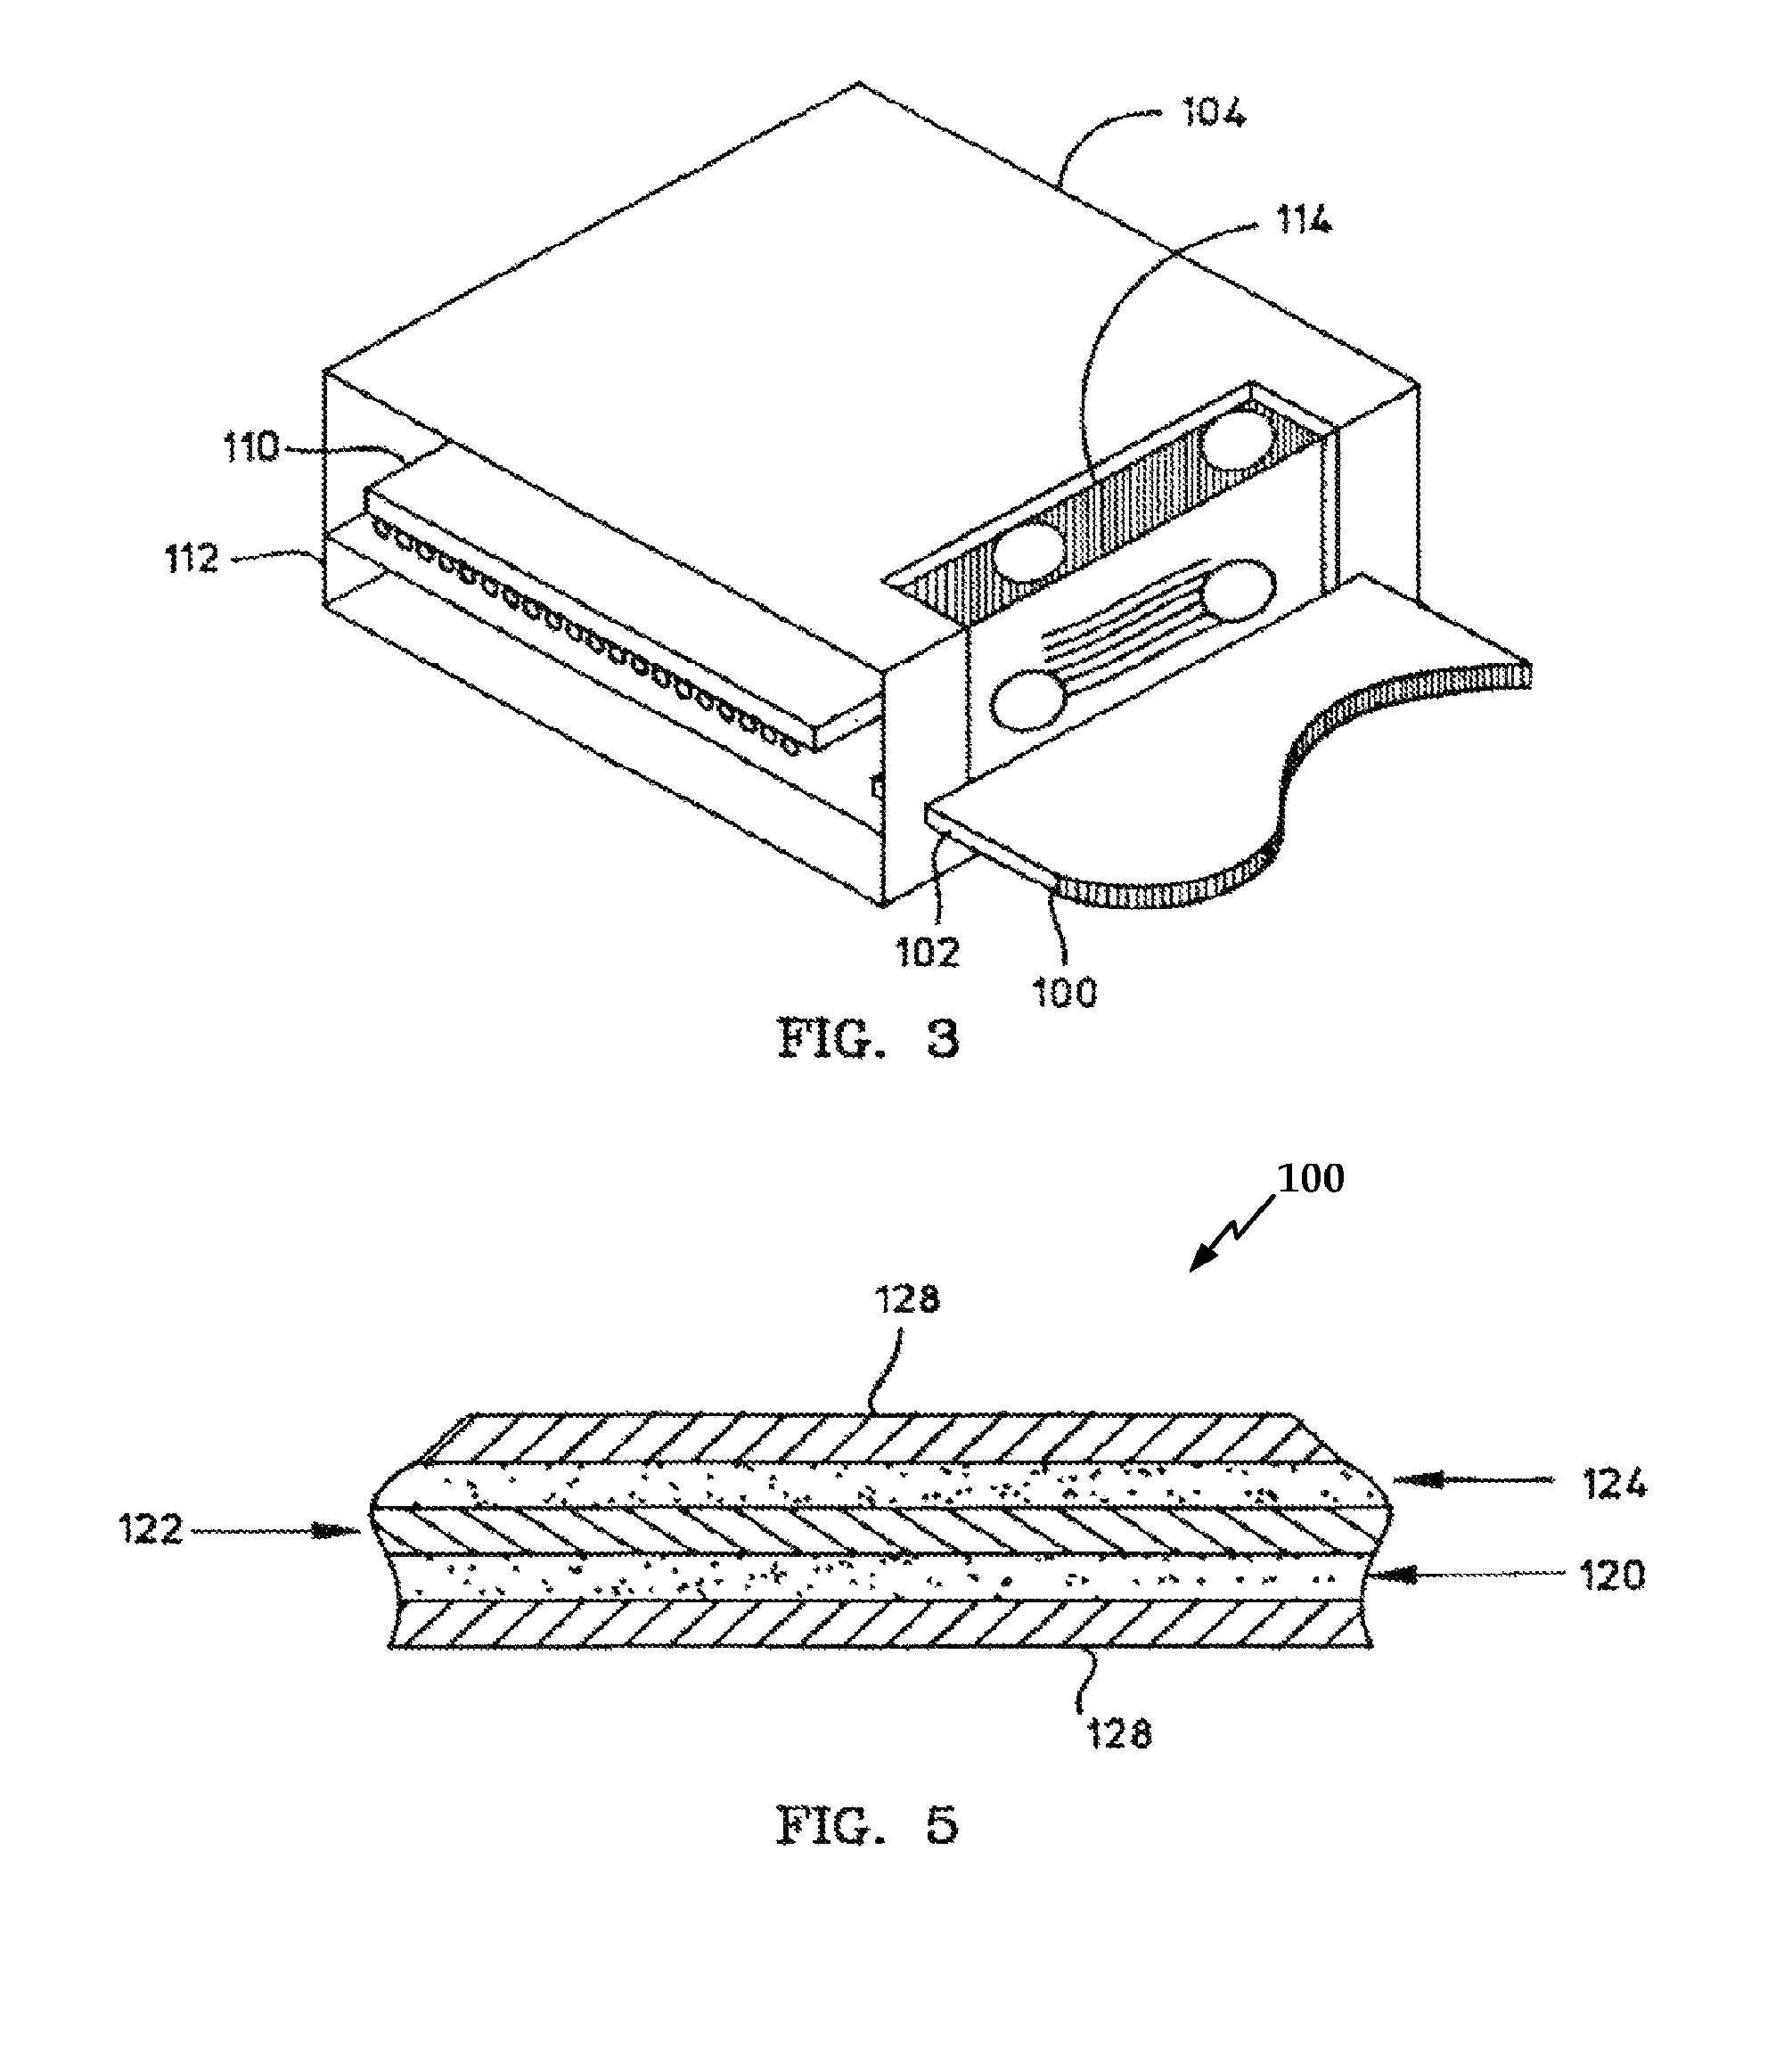 Flexible interconnect cable having signal trace pairs and ground layer pairs disposed on opposite sides of a flexible dielectric